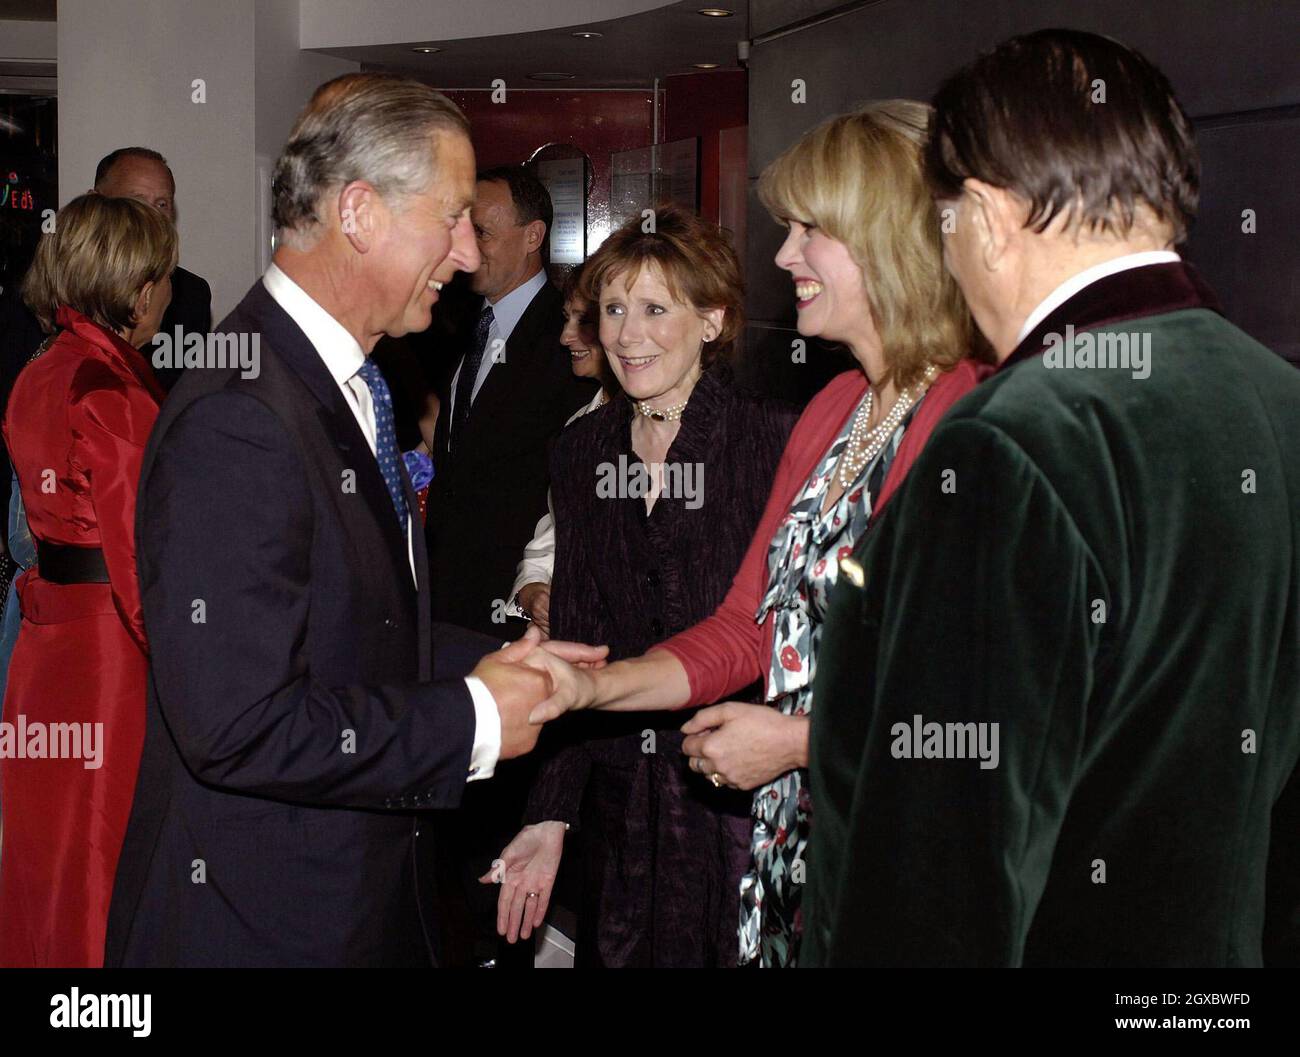 Prince Charles, Prince of Wales meets Joanna Lumley and Barry Humphries at the John Betjeman Centenary Gala in The Prince of Wales Theatre, London on September 10, 2006. Anwar Hussein/EMPICS Entertainment Stock Photo